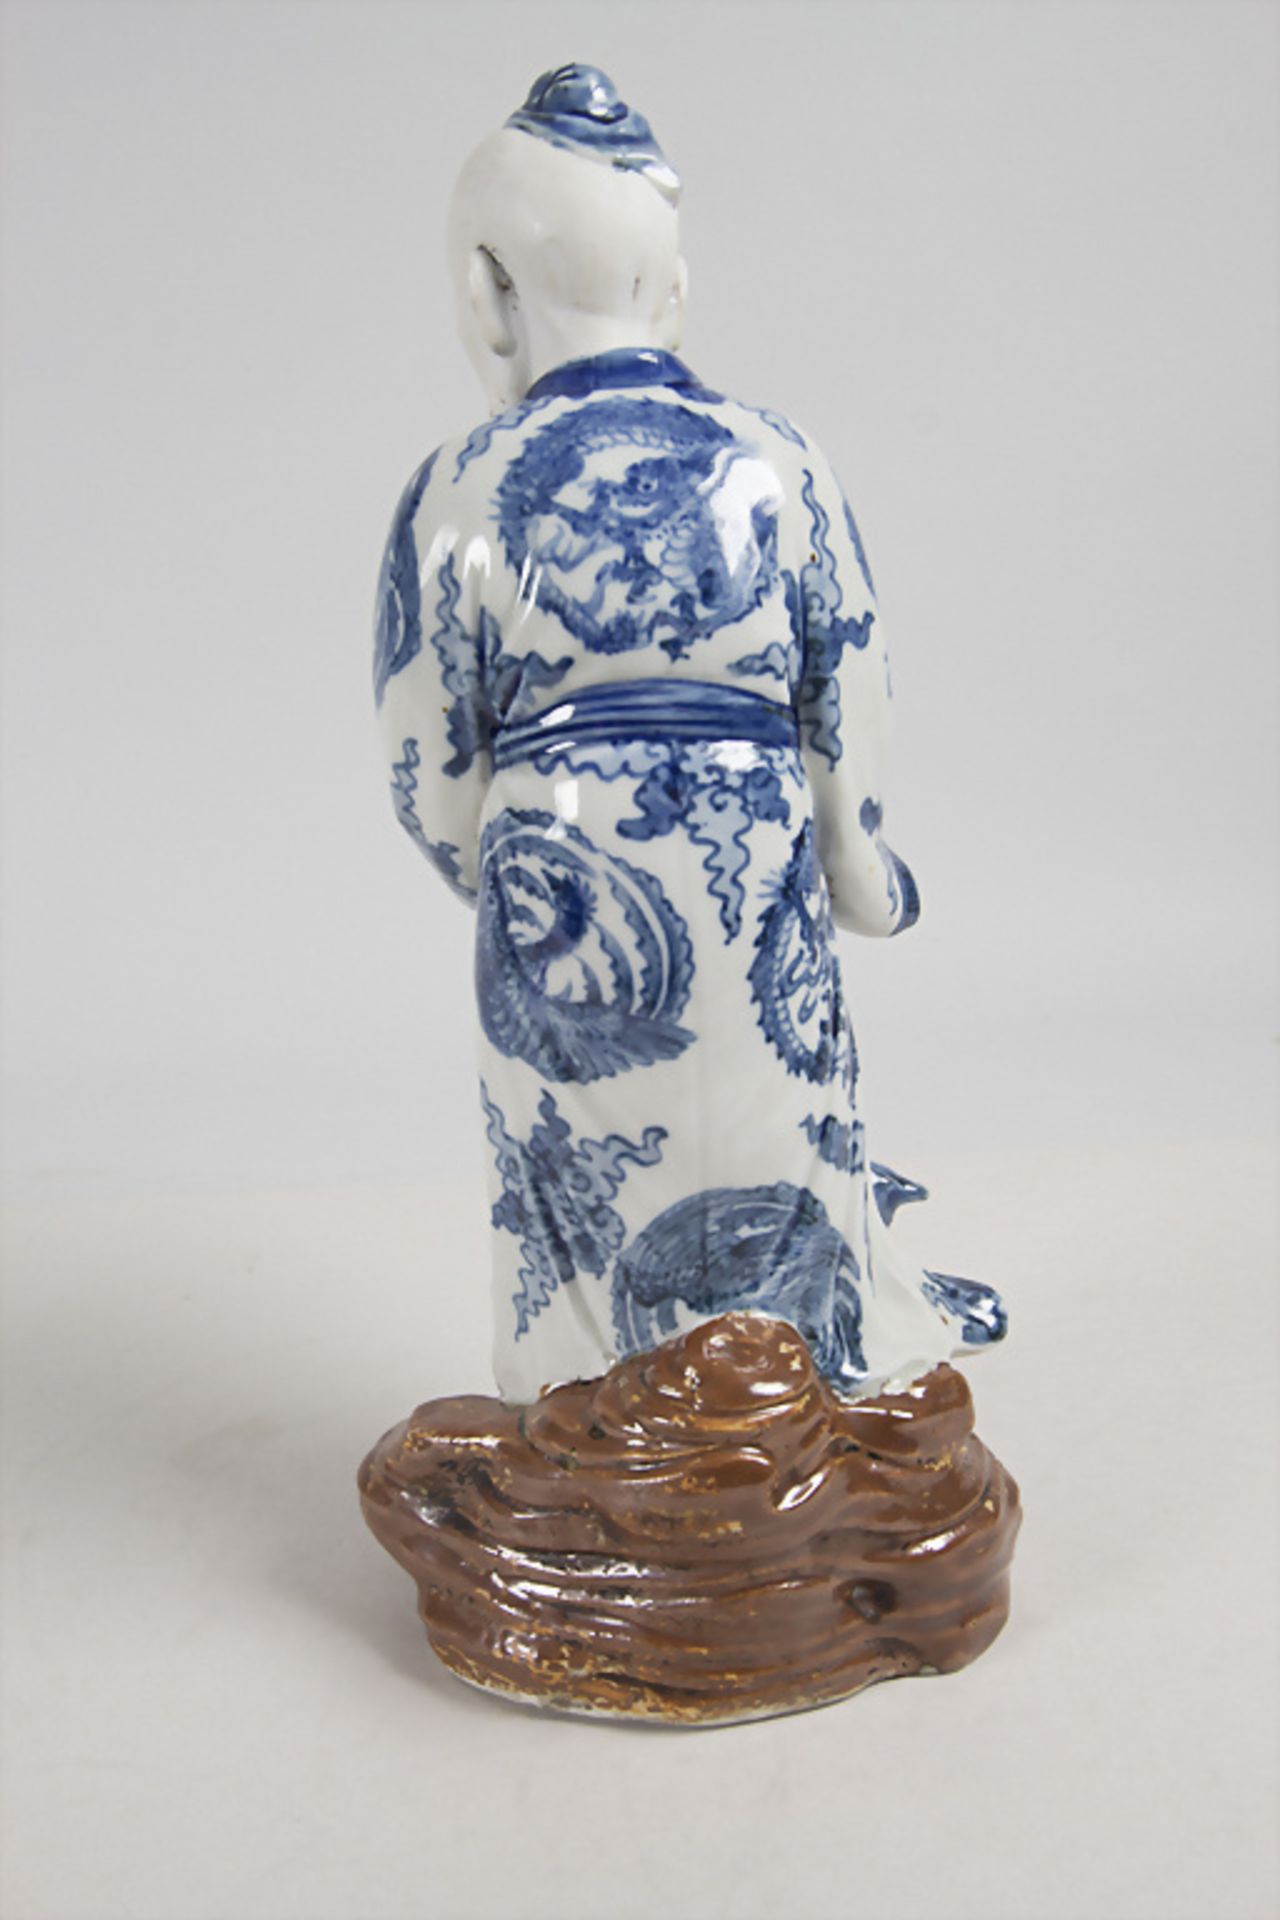 Konfuzius / A figure of Confuzius, China, Qing Dynastie (1644-1911), wohl K'ang Hsi- Periode ... - Image 3 of 8